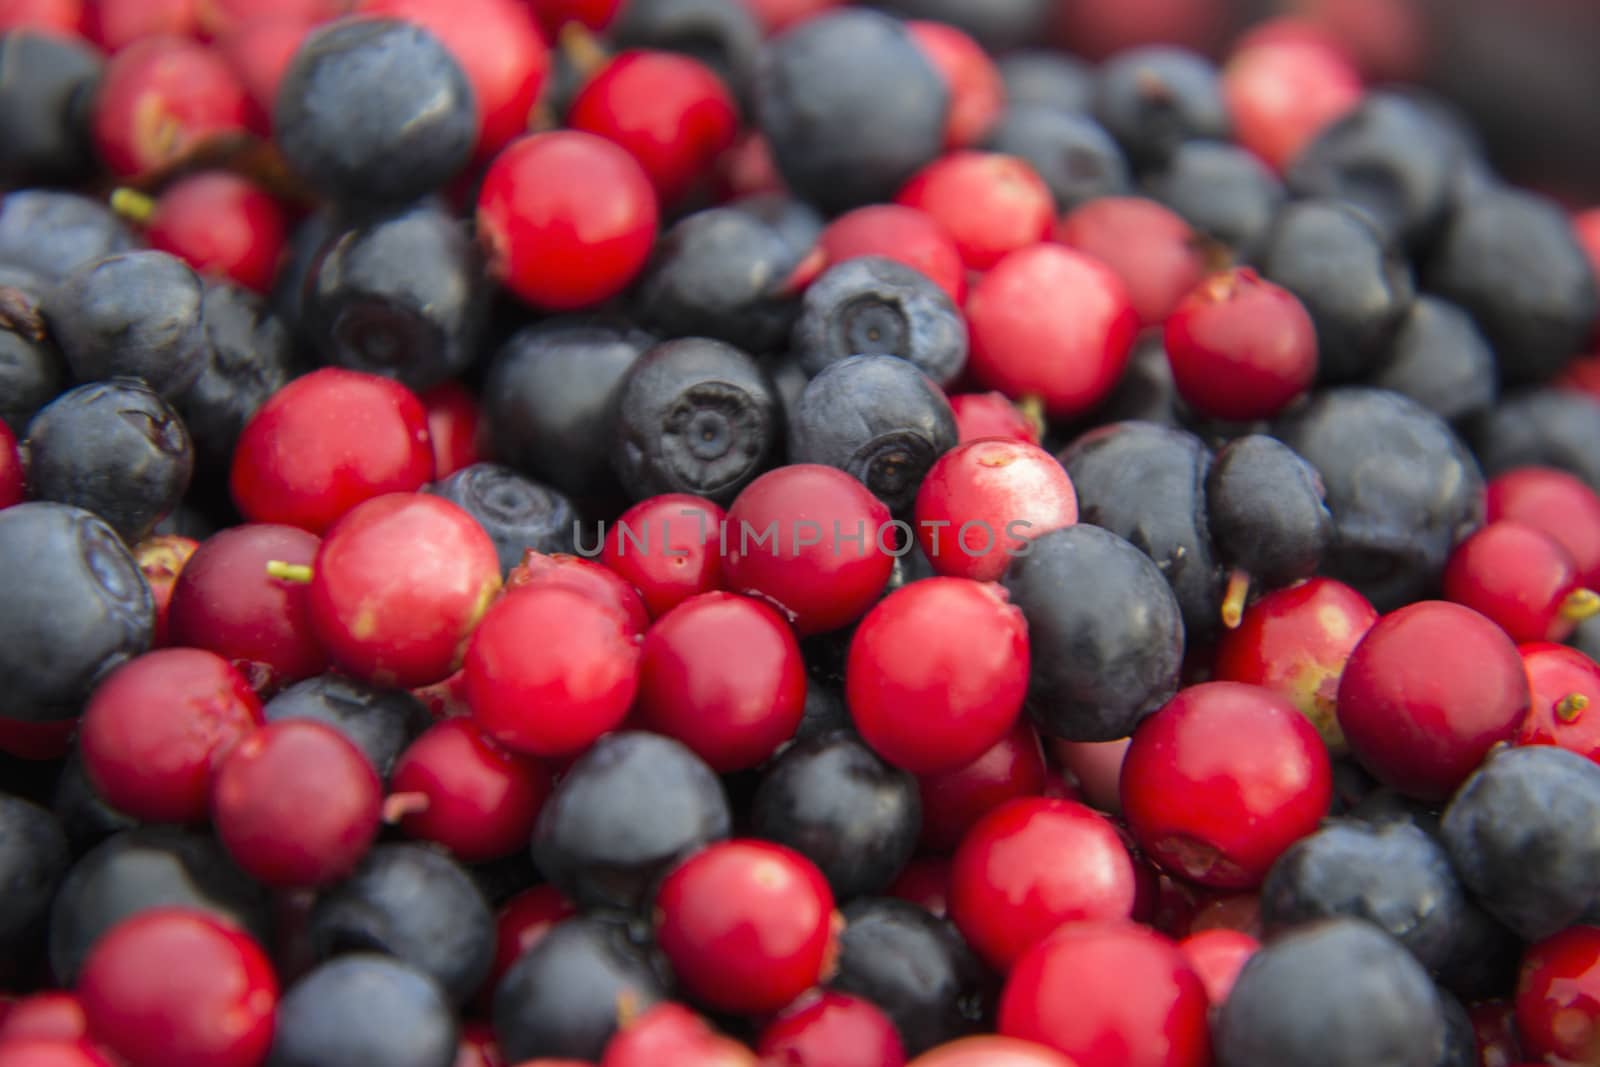 Cowberries and blueberries by Irene1601